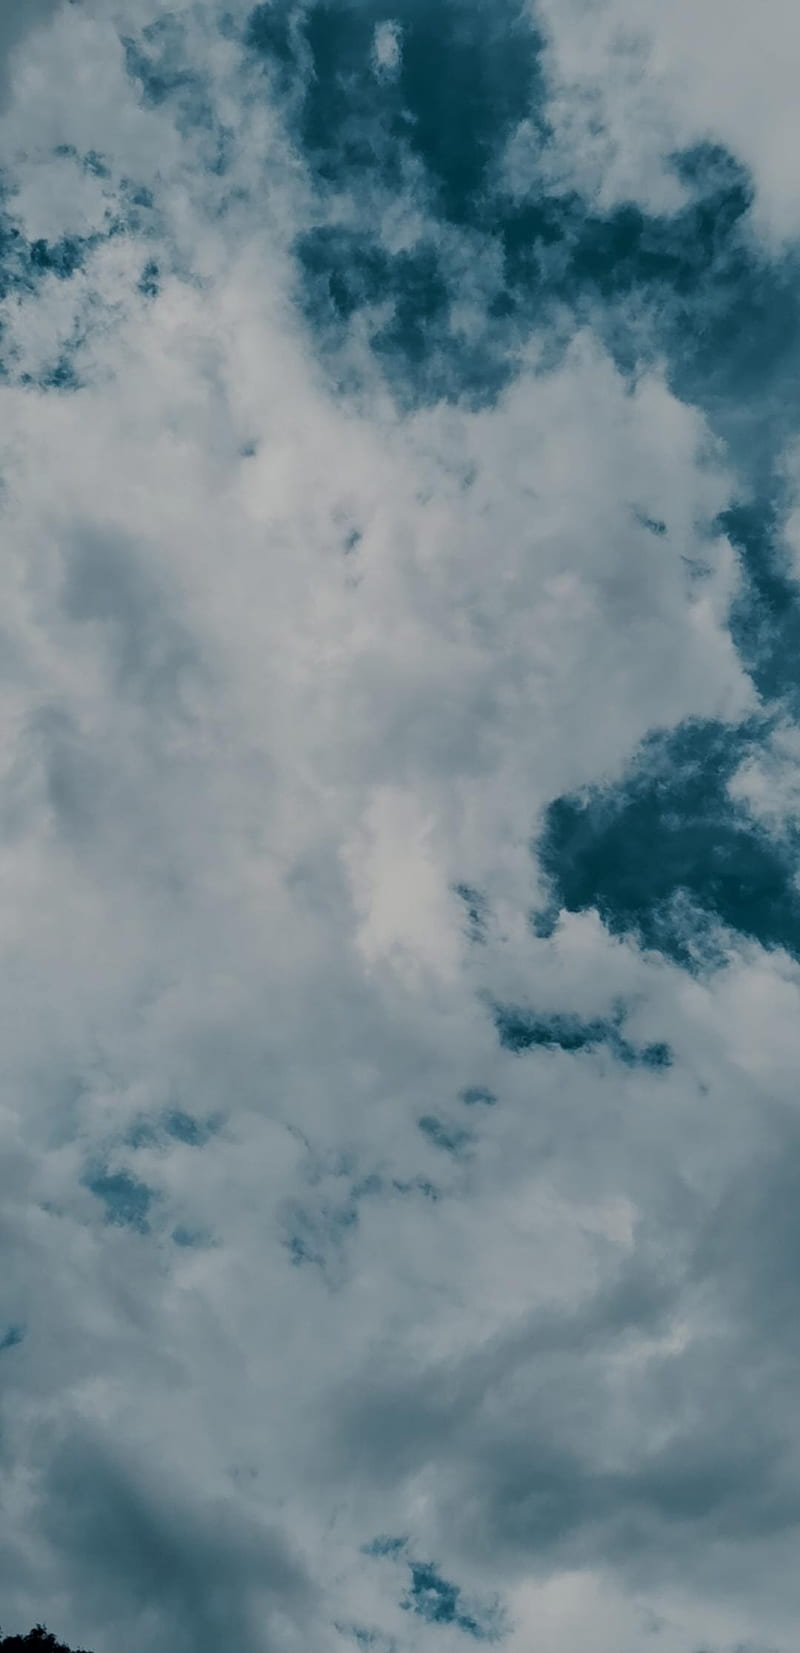 1920x1080px, 1080P free download | Clouds, blue, good vibes, vibe, HD ...